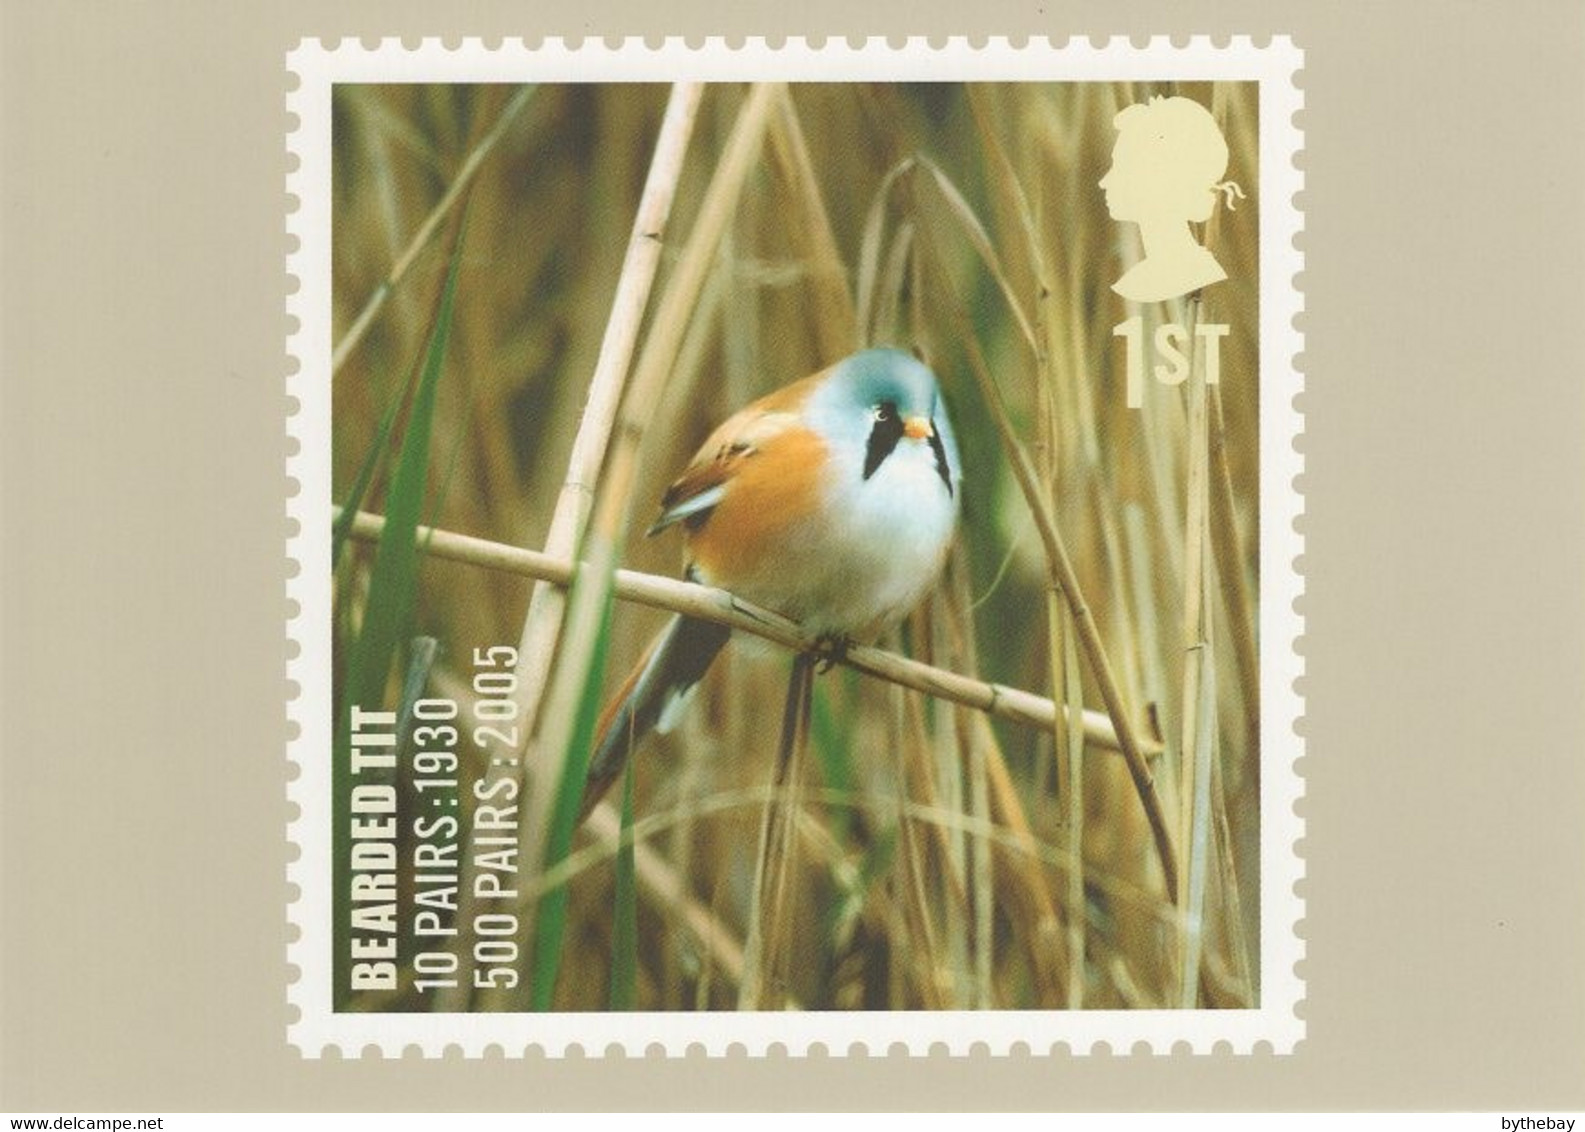 Great Britain 2007 PHQ Card Sc 2499 1st Bearded Tit - PHQ Cards